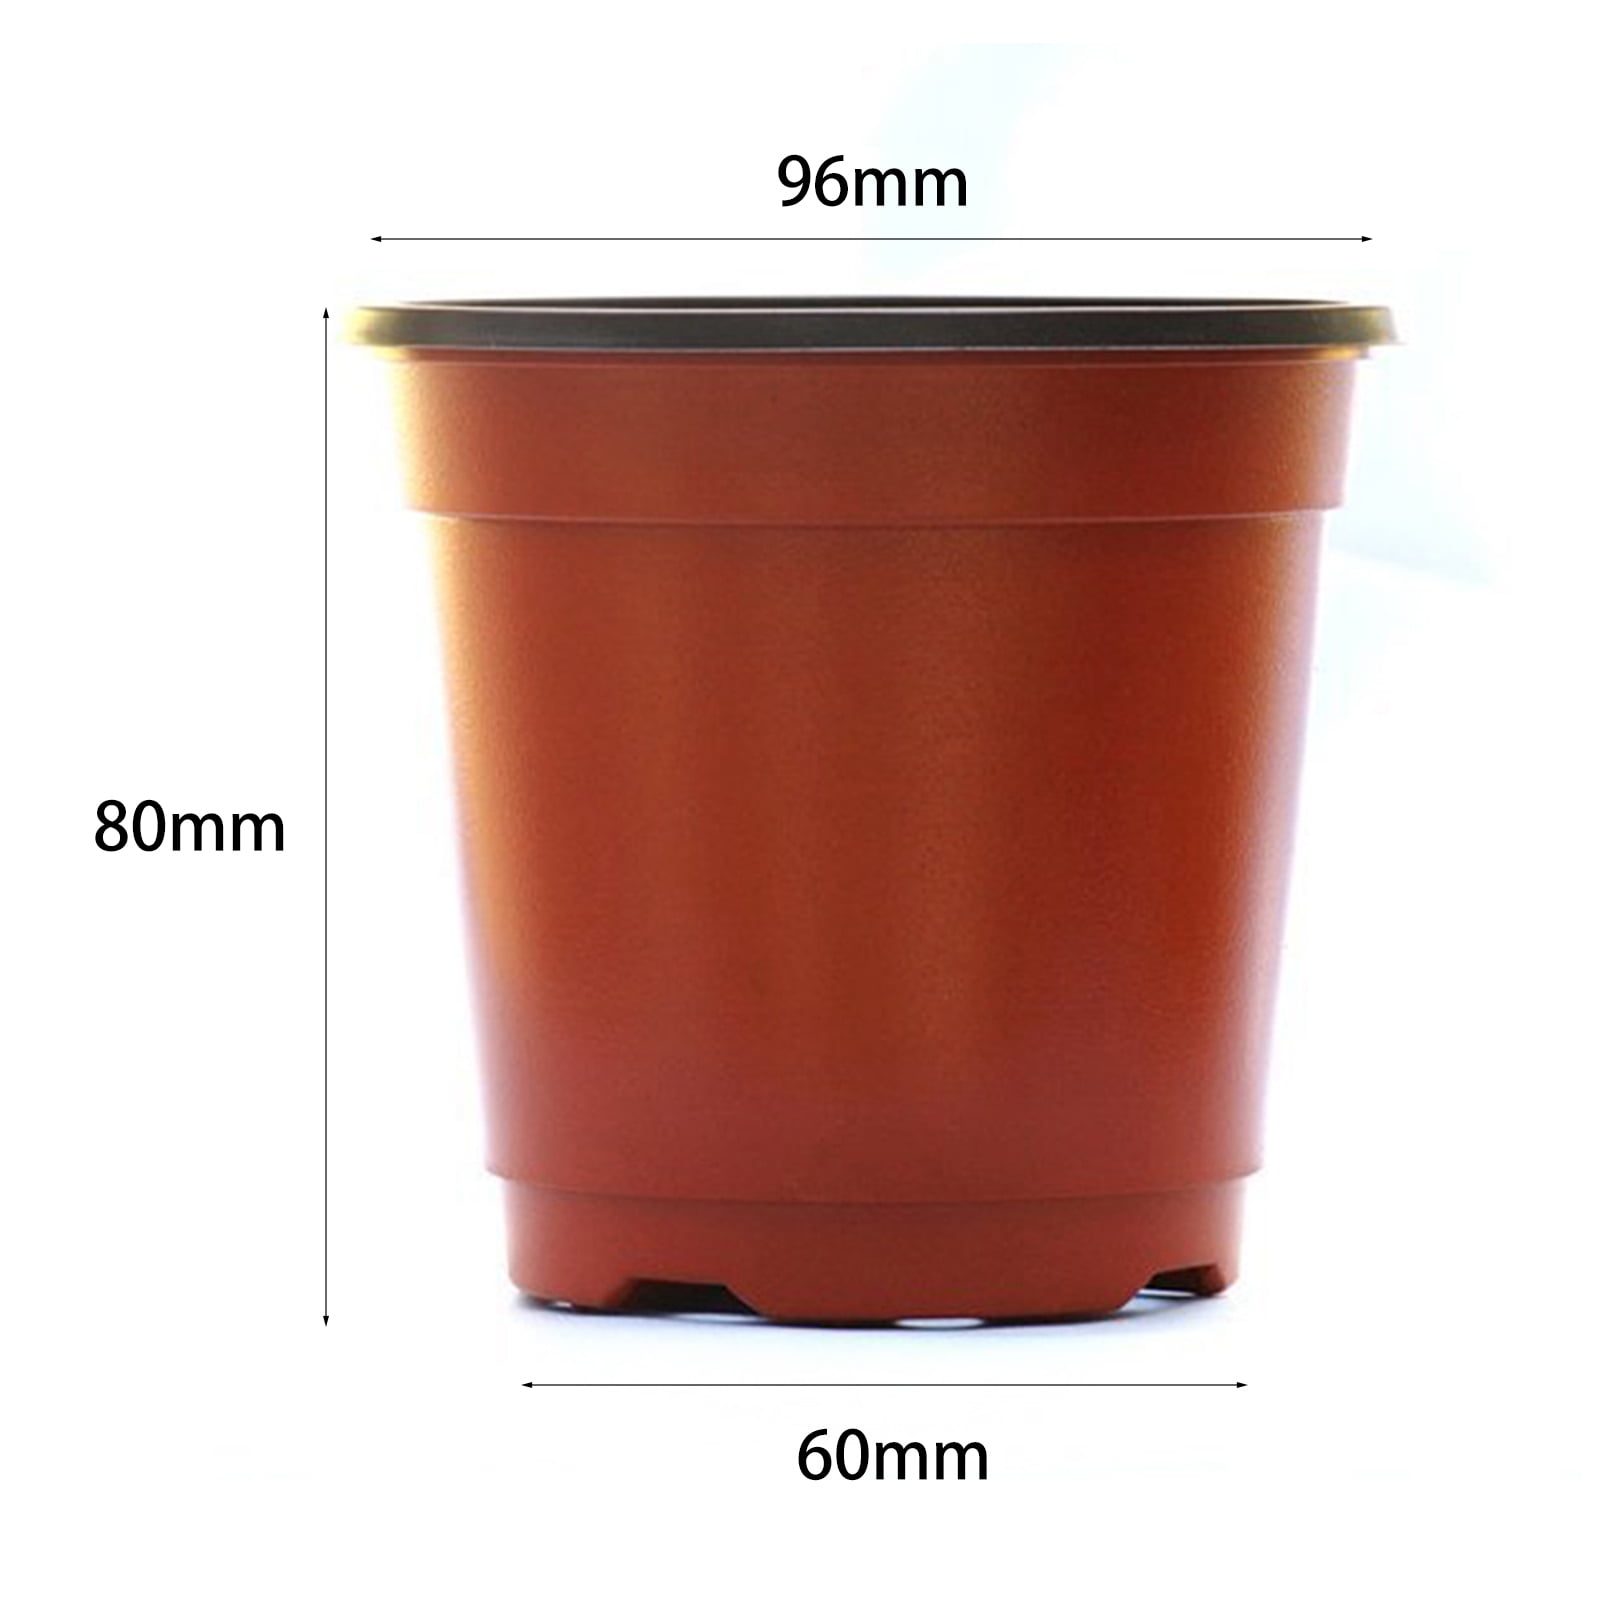 DUNPUTE 4 5 6 Inch Nursery Pots 50 Packs Seedling Pots with Drainage Hole Black, 6 Inch Plastic Plant Starting Containers for Seedling Cutting Transplanting 